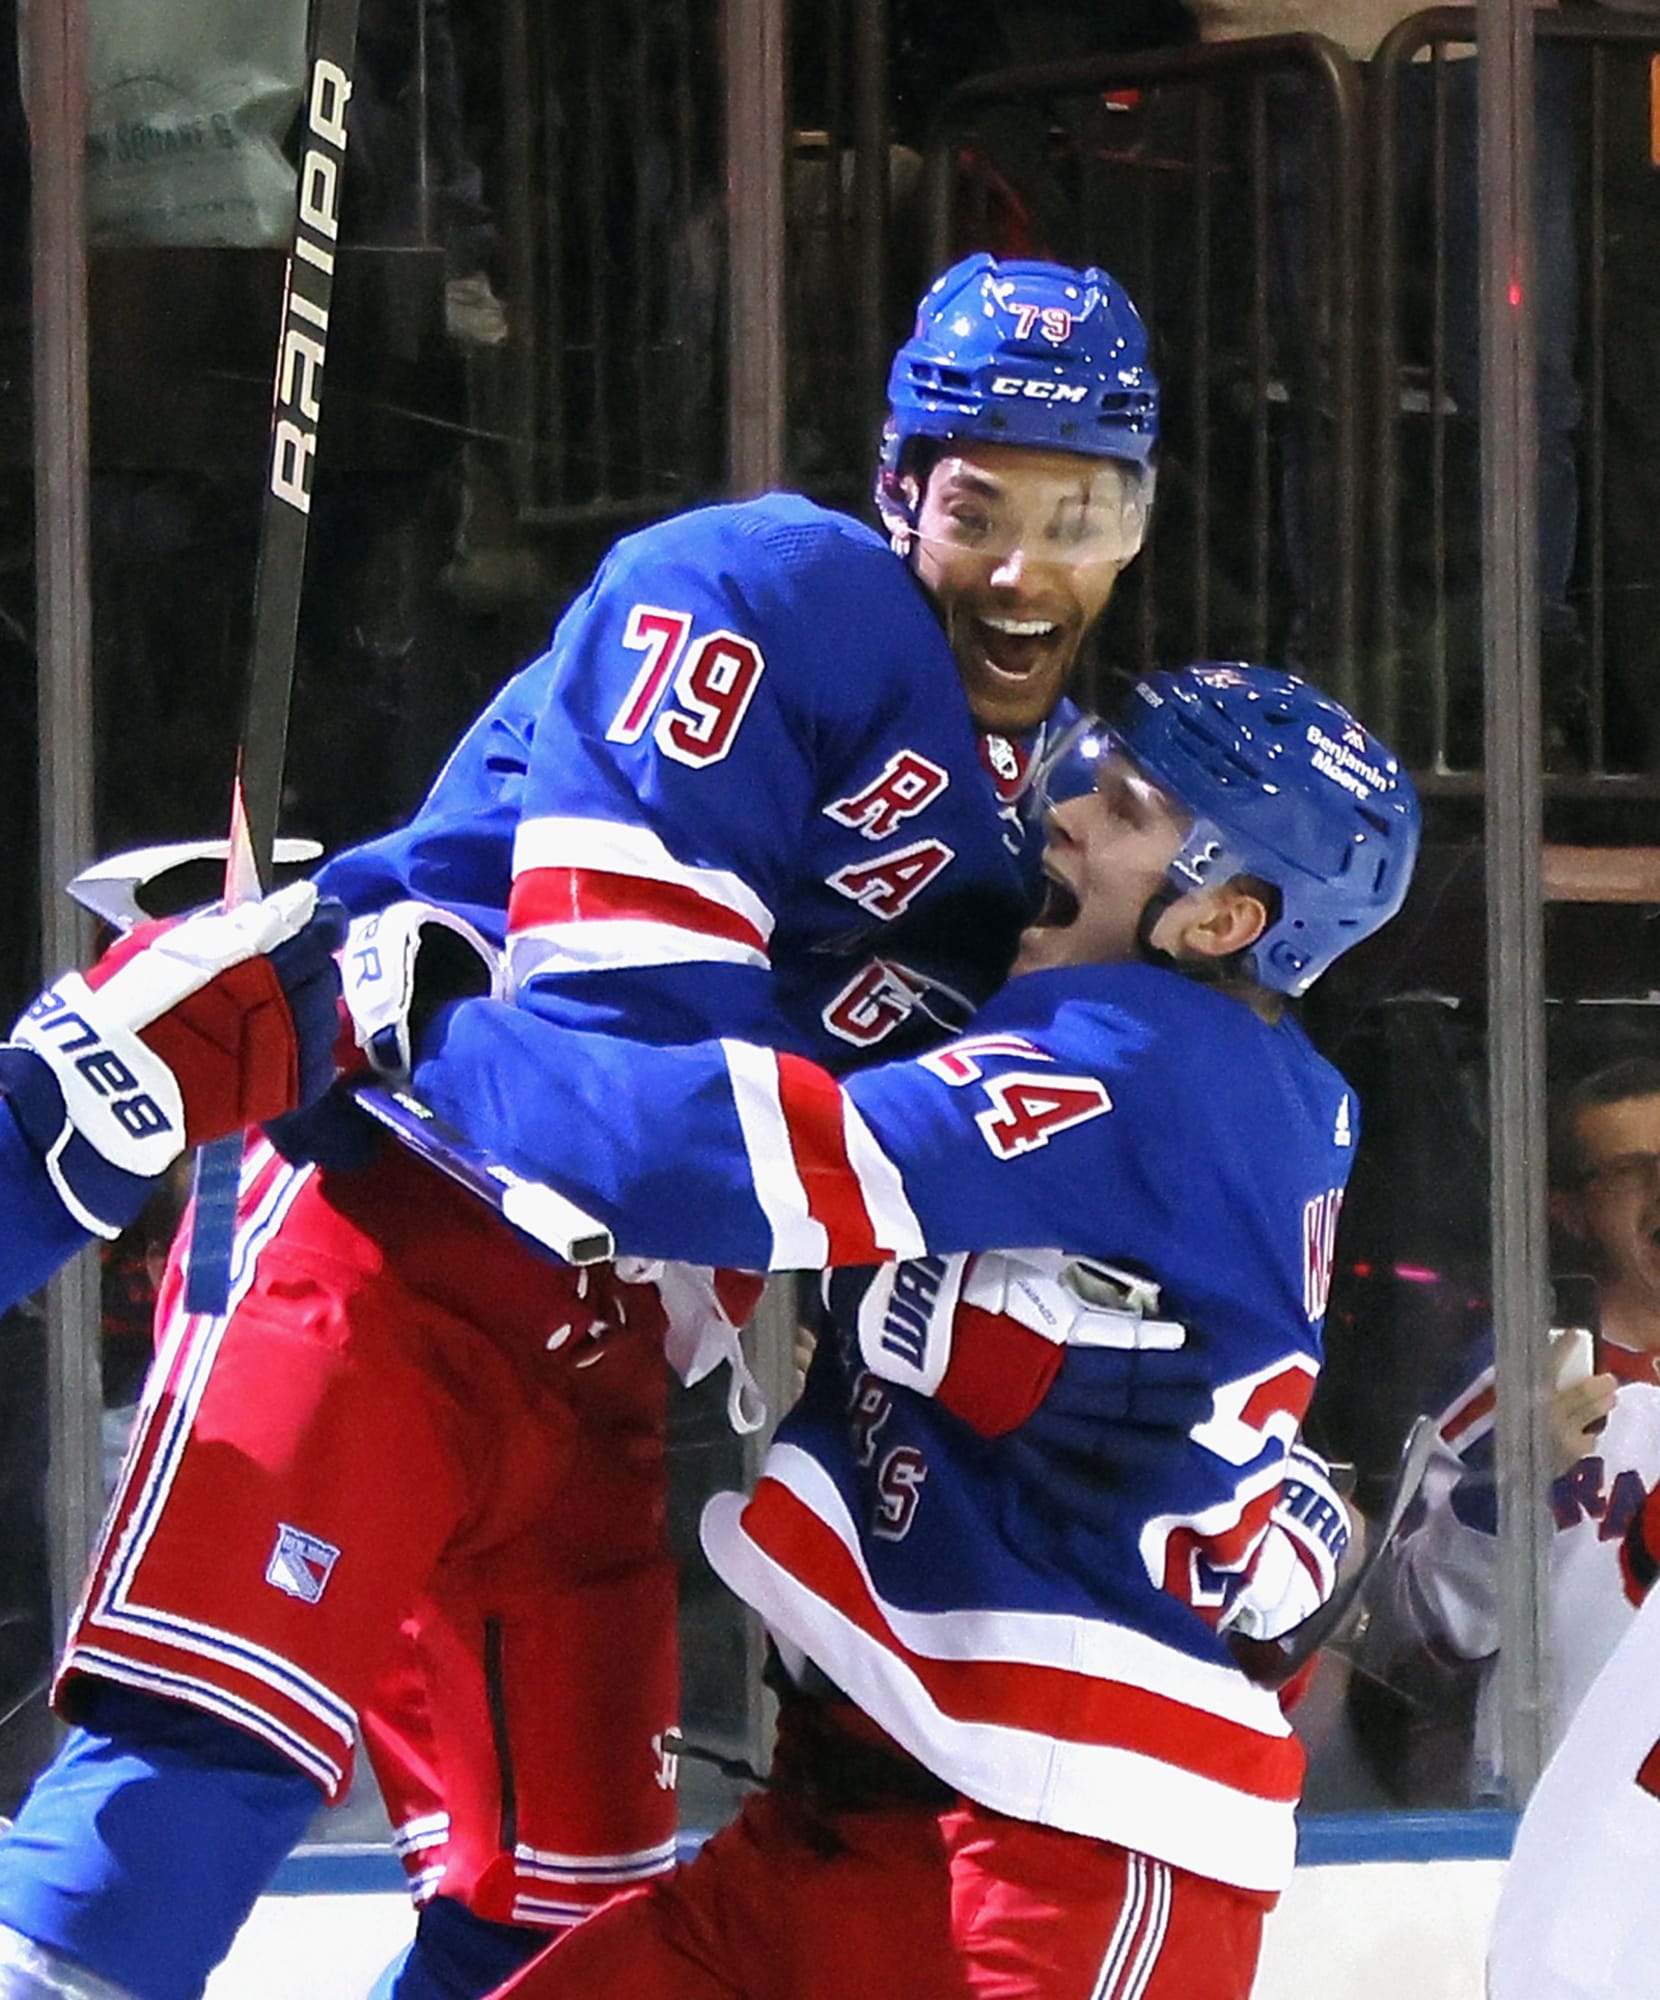 Rangers' season ends after crushing Game 7 loss to dominant Devils